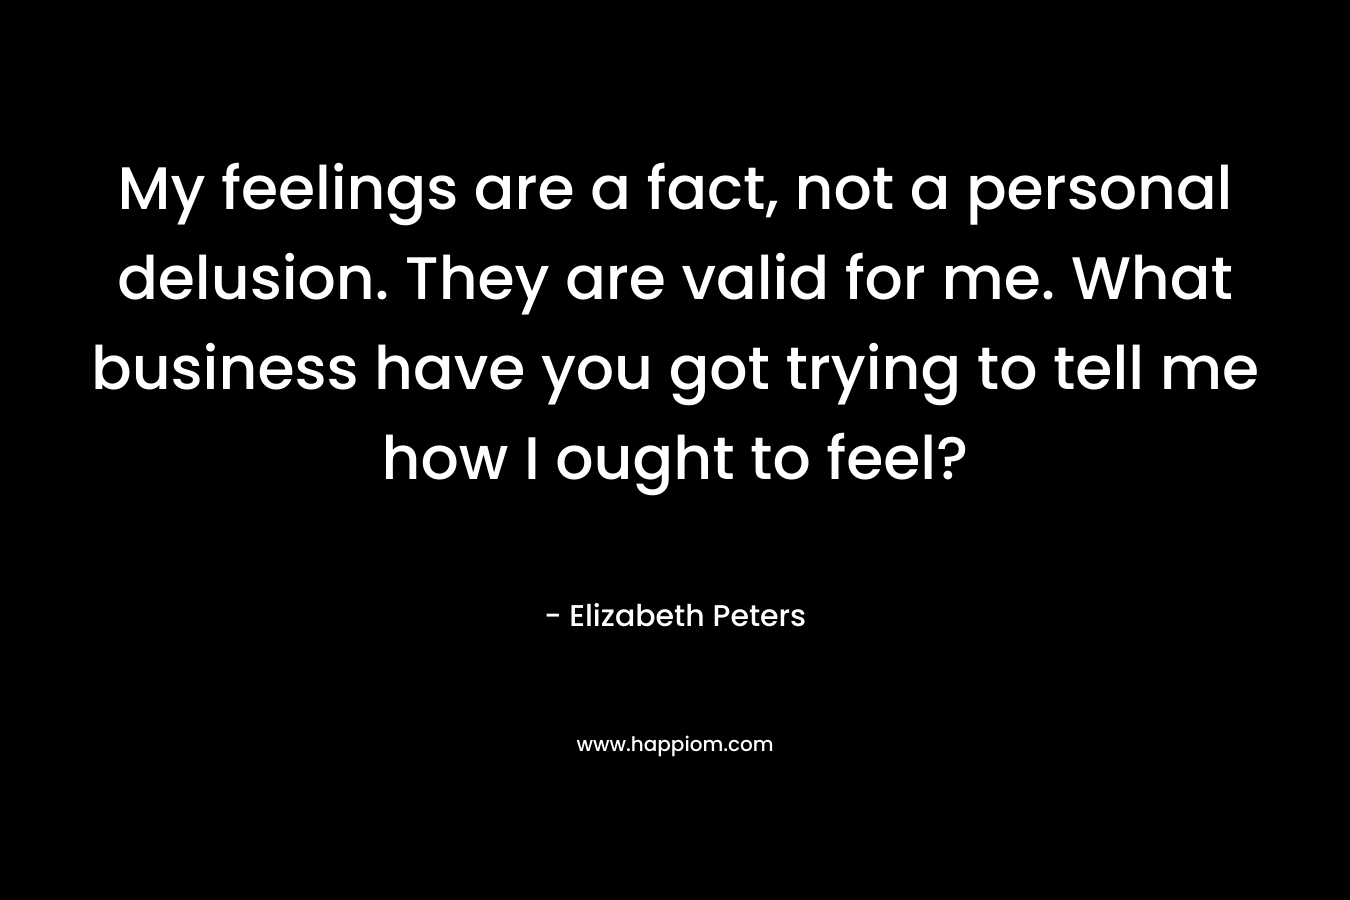 My feelings are a fact, not a personal delusion. They are valid for me. What business have you got trying to tell me how I ought to feel?